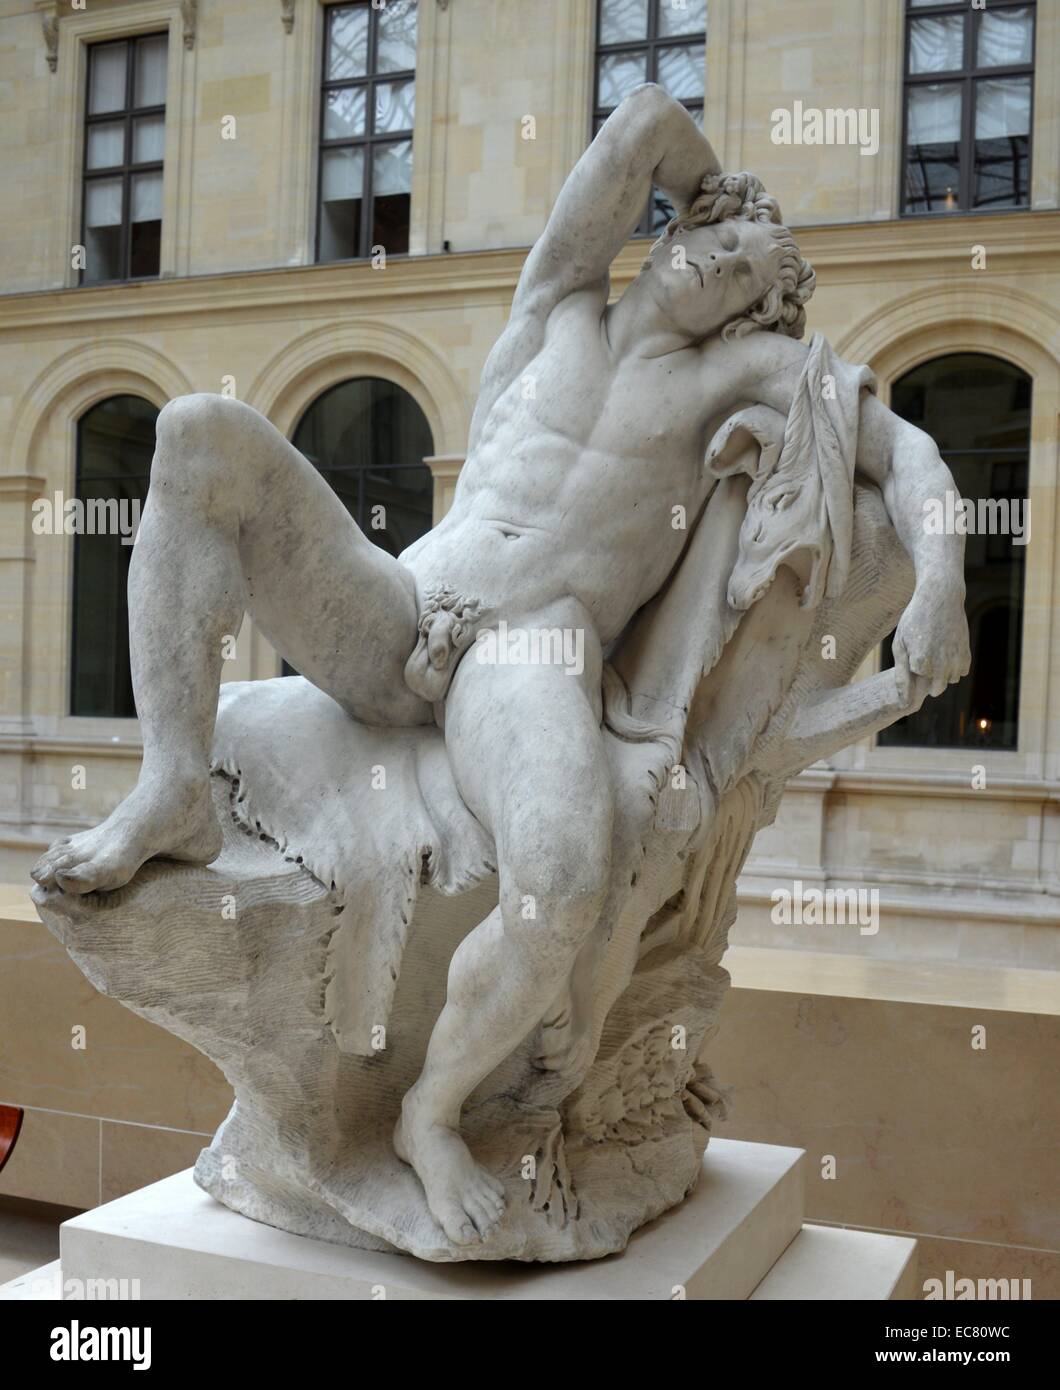 Marble statue of a 'Sleeping Faun' by Edme Bouchardon (1698-1762), a French sculptor who was esteemed as the greatest sculptor of his time. Dated 17th century. Stock Photo